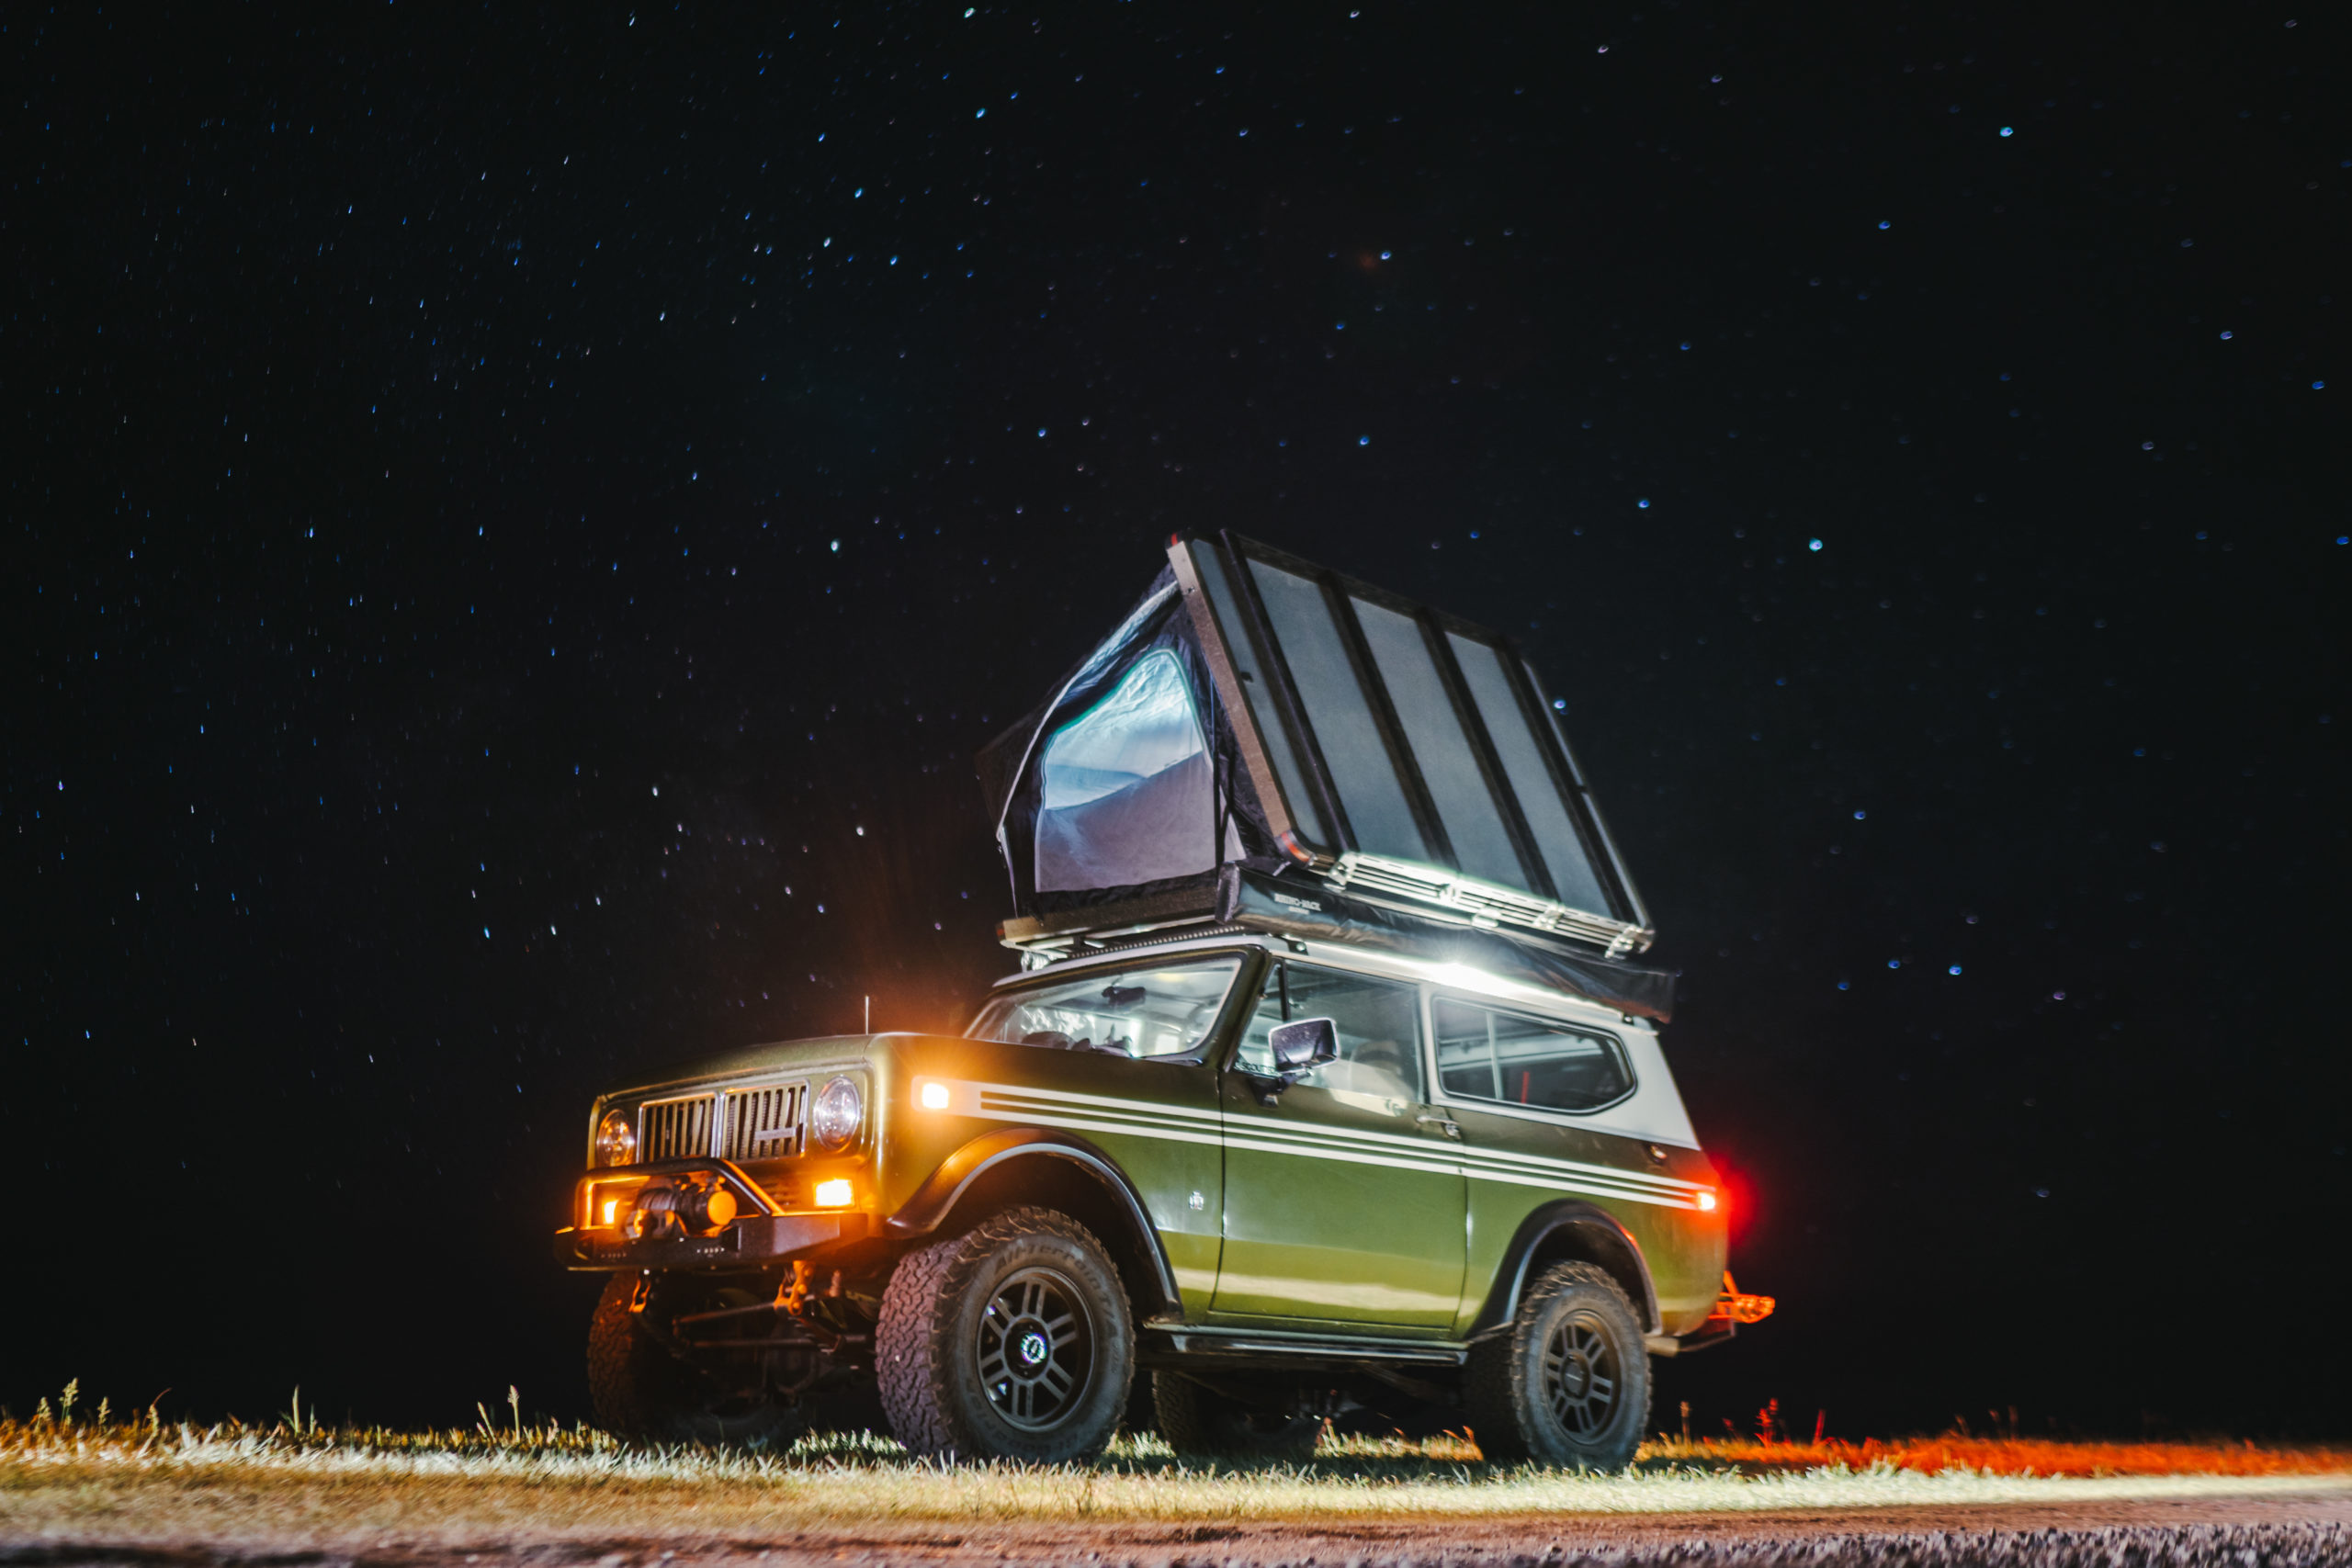 Scout II at night with stars